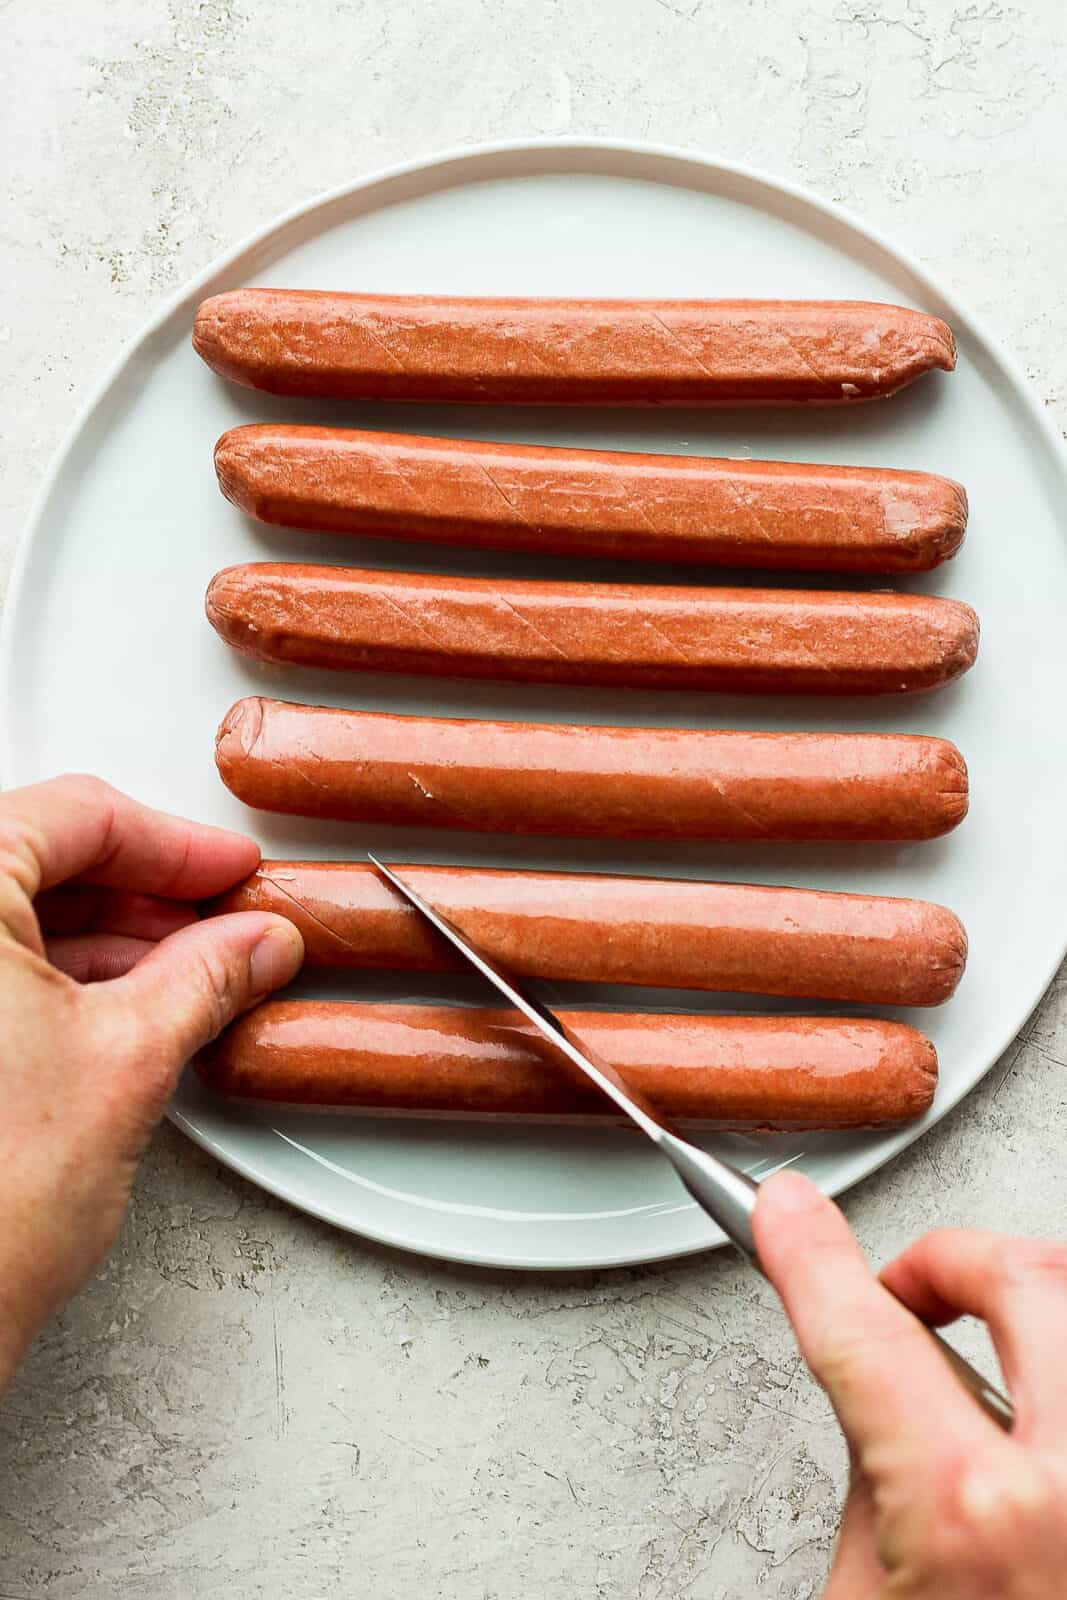 A paring knife scoring one of six hot dogs on a plate.